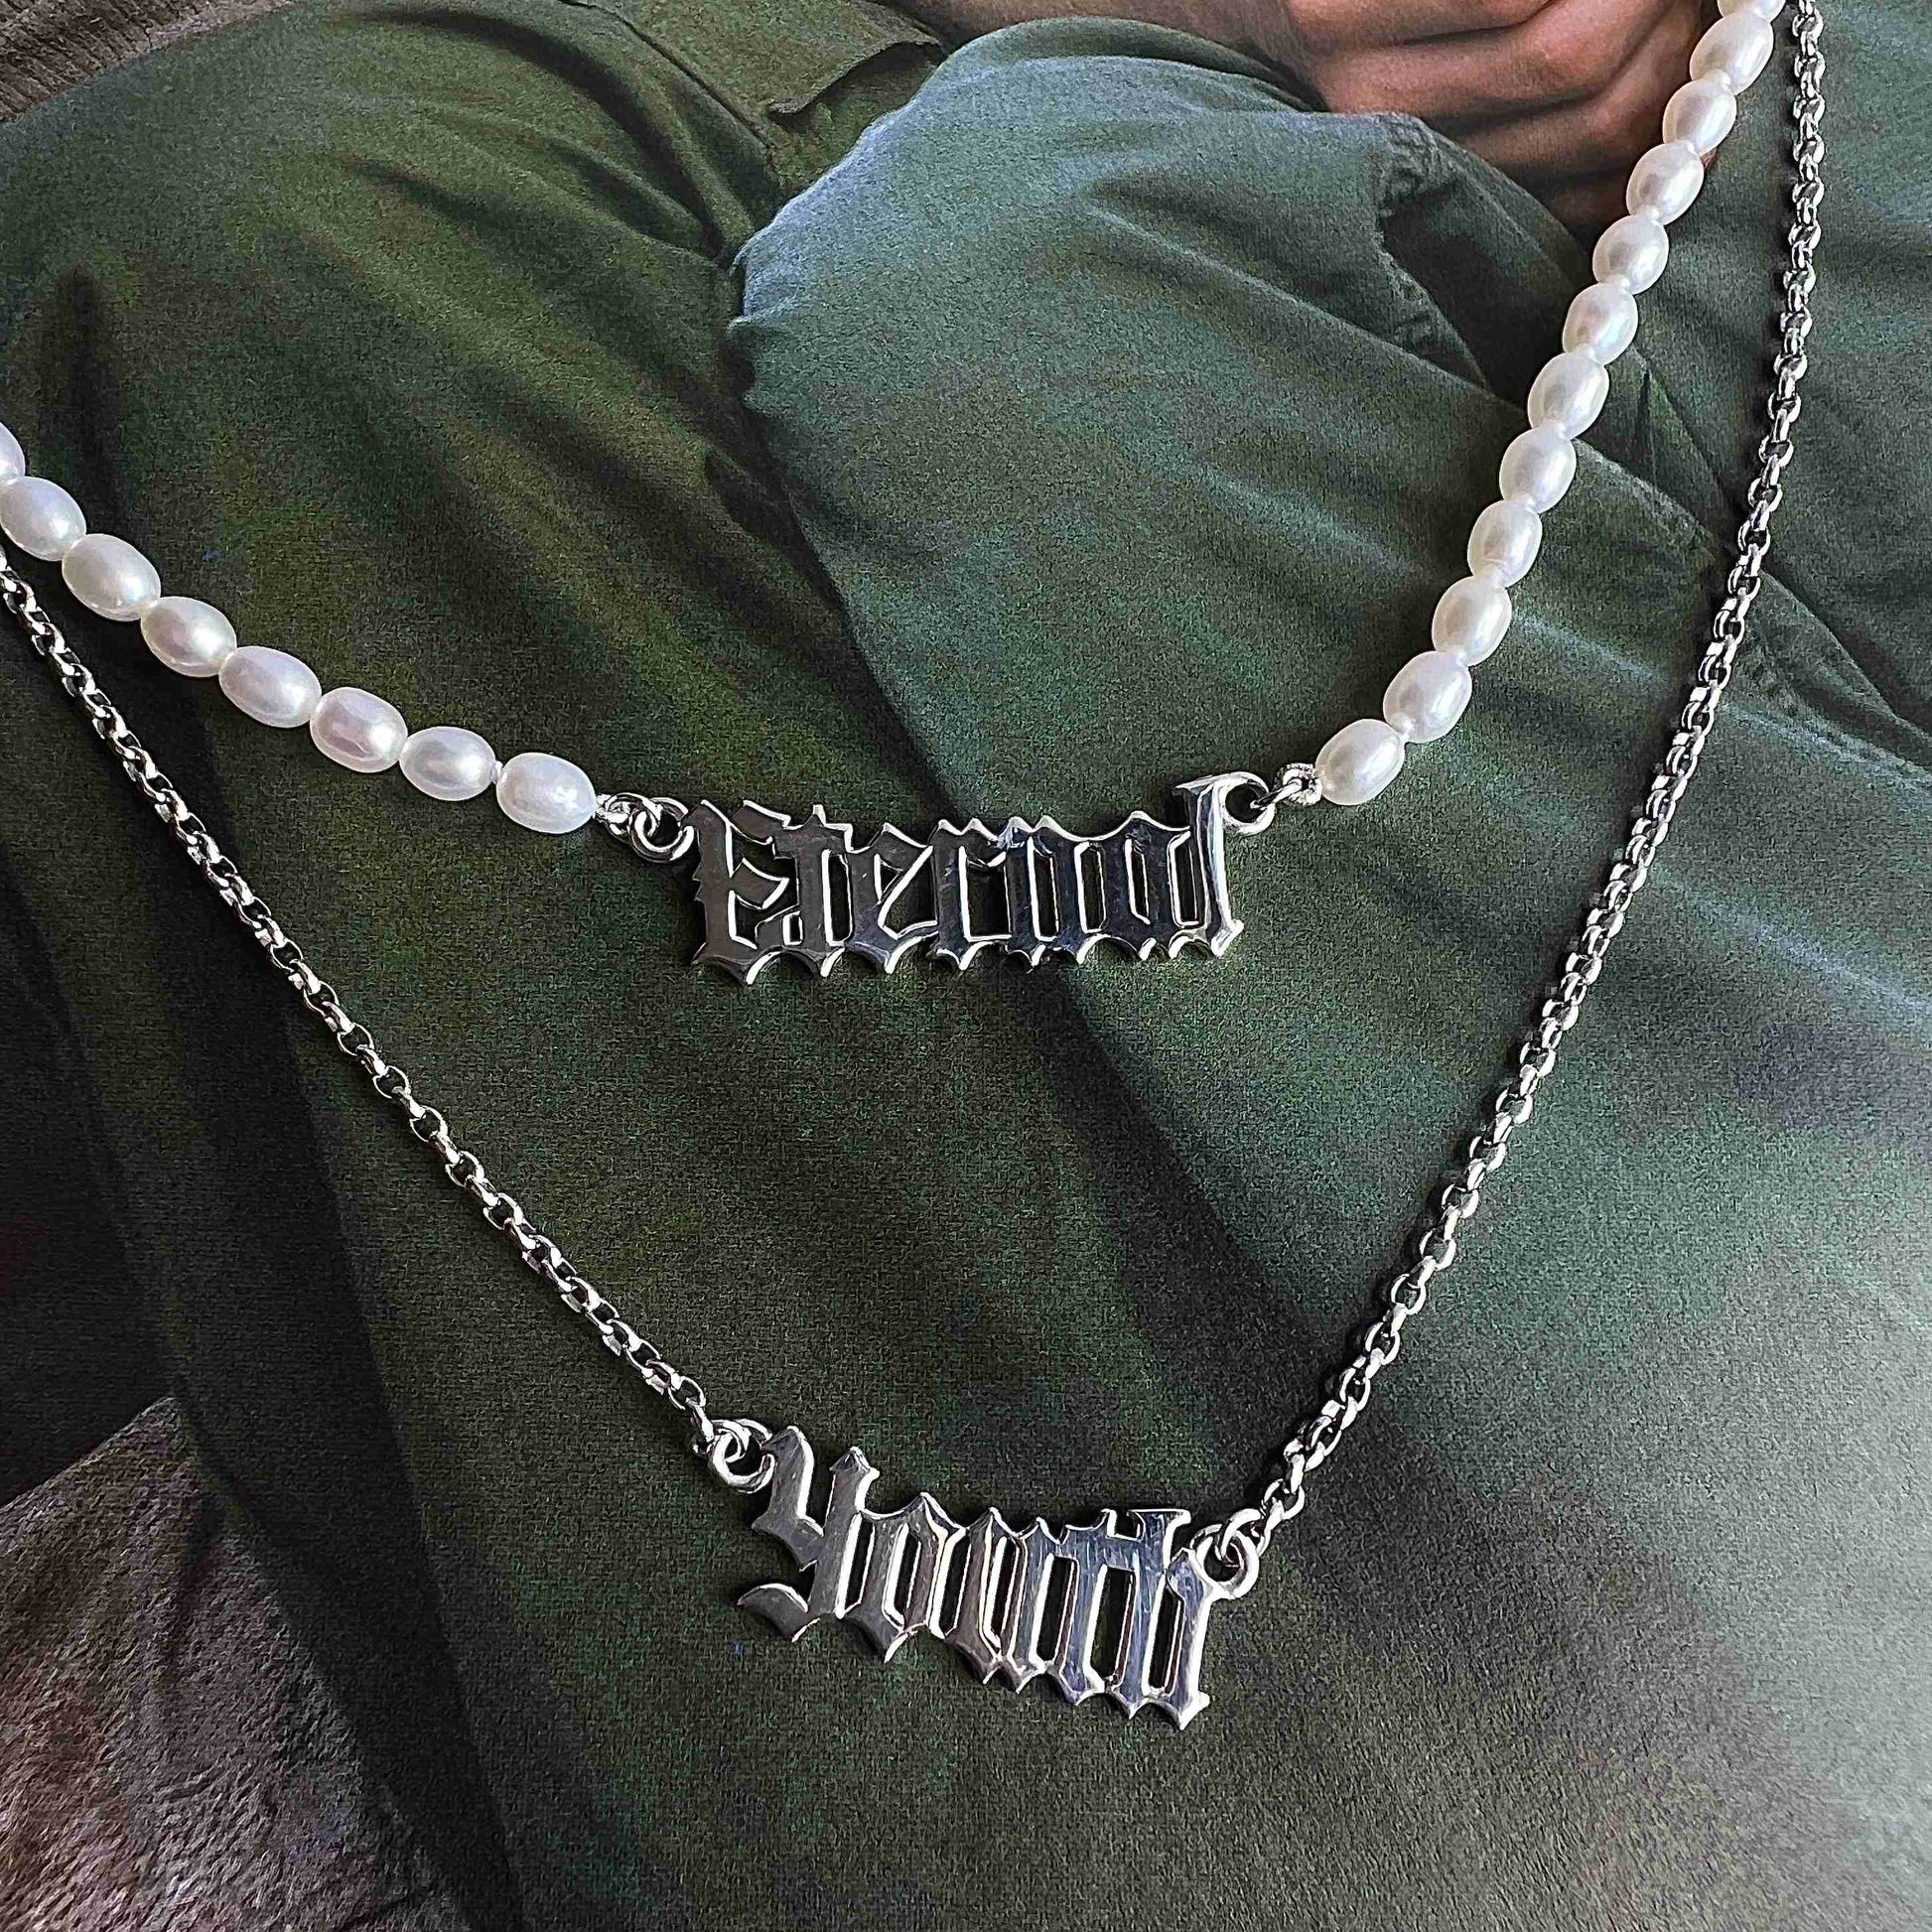 PEARL NECKLACE "ETERNAL" / SILVER